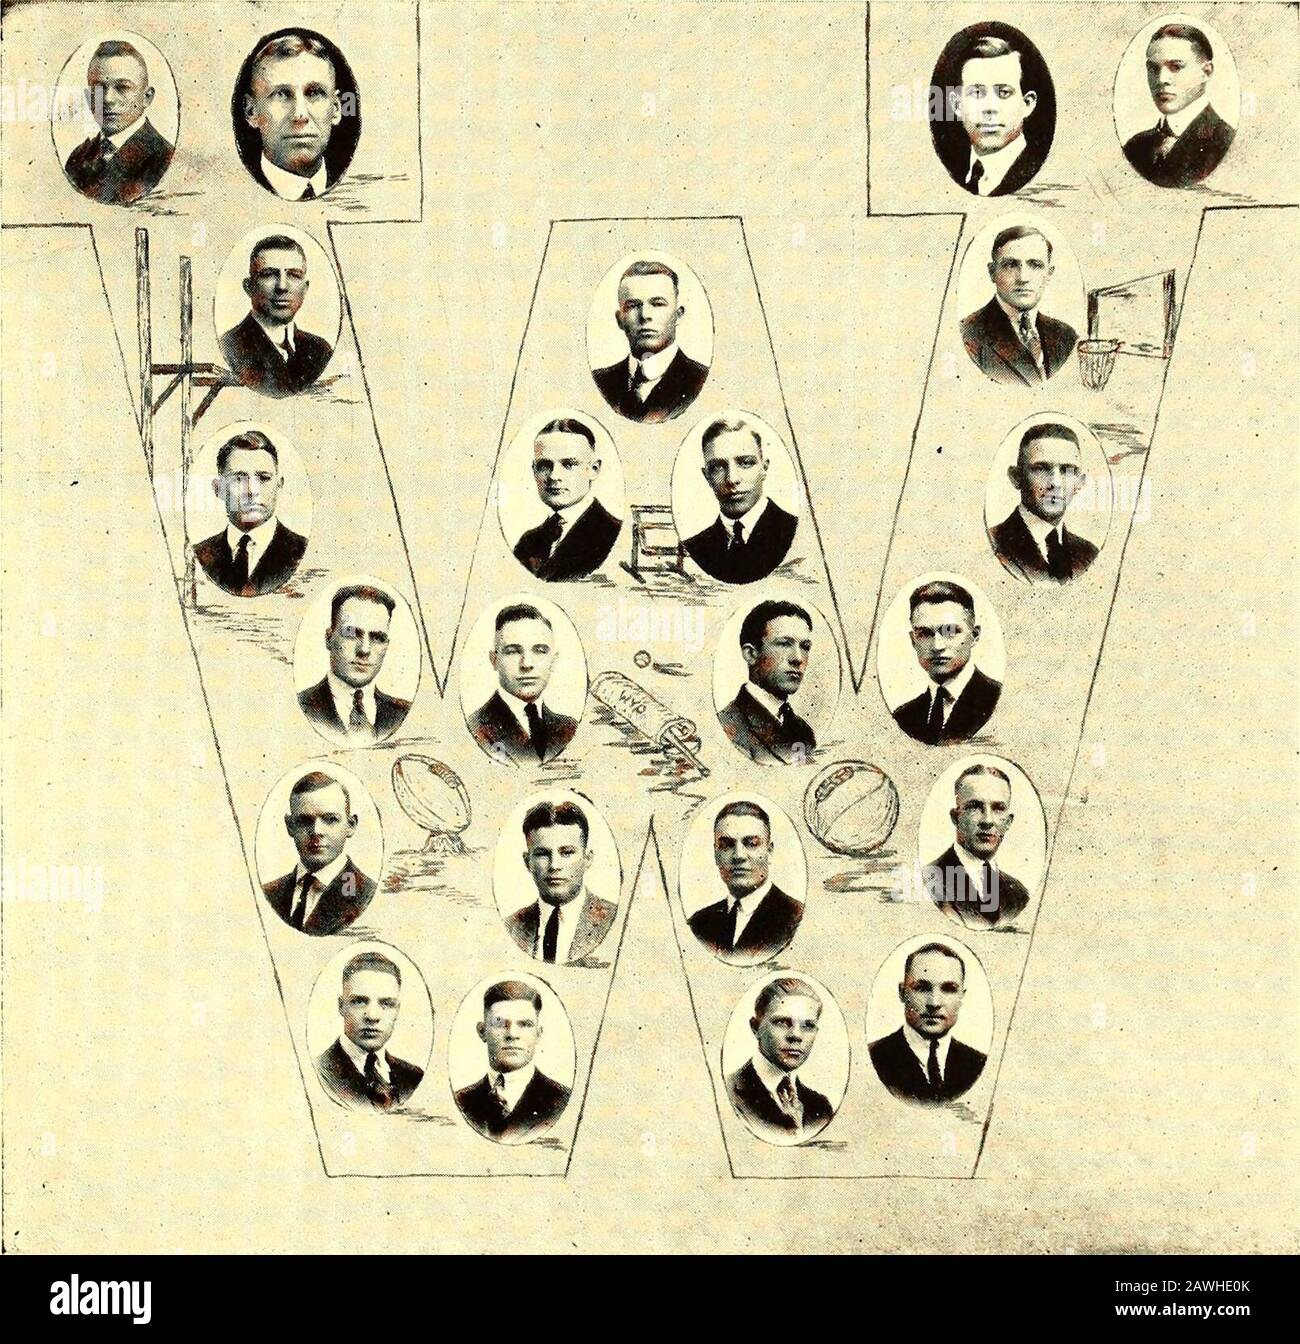 Wyo . Alumni take positions in the Wyo-ming High Schools—in fact the first President of the Club took home the State HighSchool Championship this year. 1922 MEMBERSHIP Honorary MembersDr. H. E. McCollum Coach John Corbett Officers Claire Tucker -. - President Sam Neff -.- - Vice-President Oliver Knight -.- Secretary and Treasurer MembersPerry Alers Fred Parks Fritz Erb Roy Rodin Ben Gregg Gregory Smith George Hegewald Walter Smyth Frank Highleyman Donald Thompson Hamilton Cordiner Robert Thompson Walter Jensen Chas. Wittenbraker Ted Madden Robert Wilson Orion Neff Michael Wind Alumni Dean Soul Stock Photo